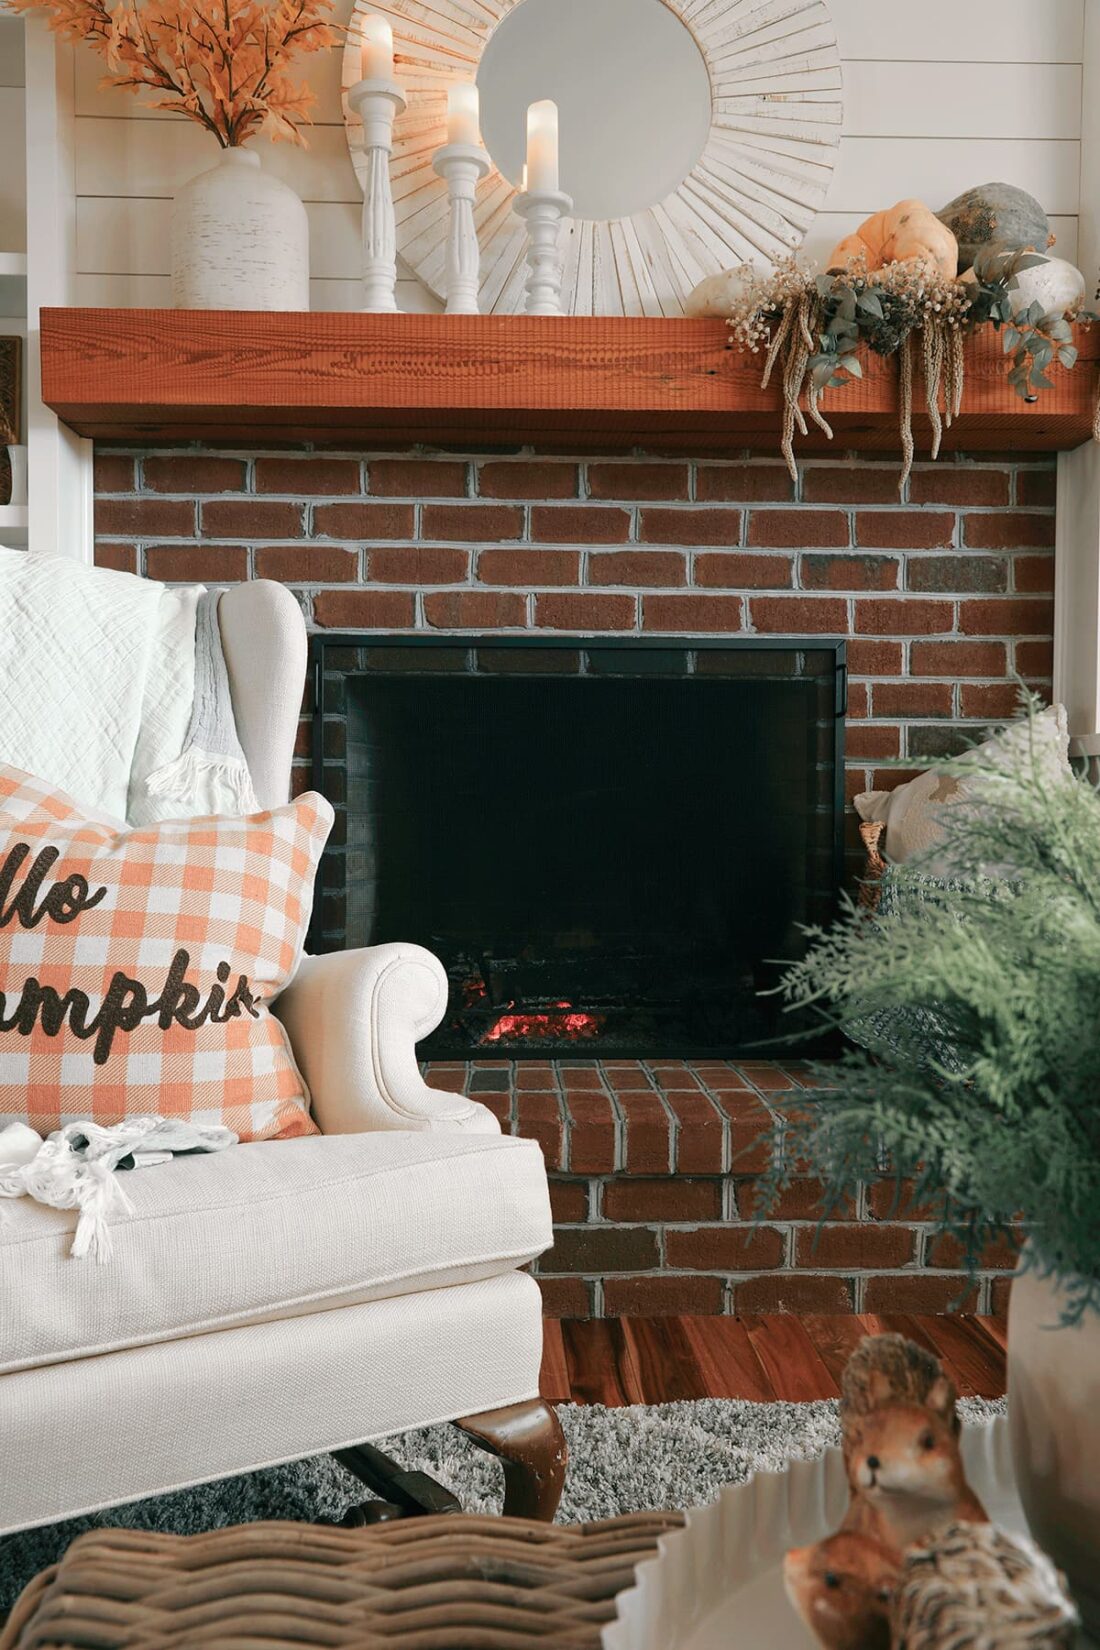 Picture of fireplace decorated with pumpkins and candles. And a cozy chair pulled up by the fire.